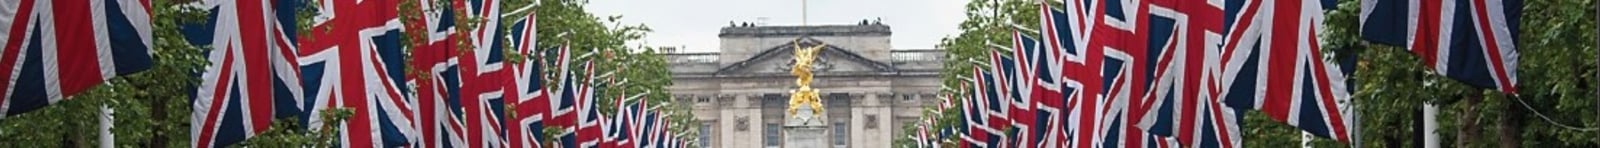 detail of buckingham palace and union jack flags